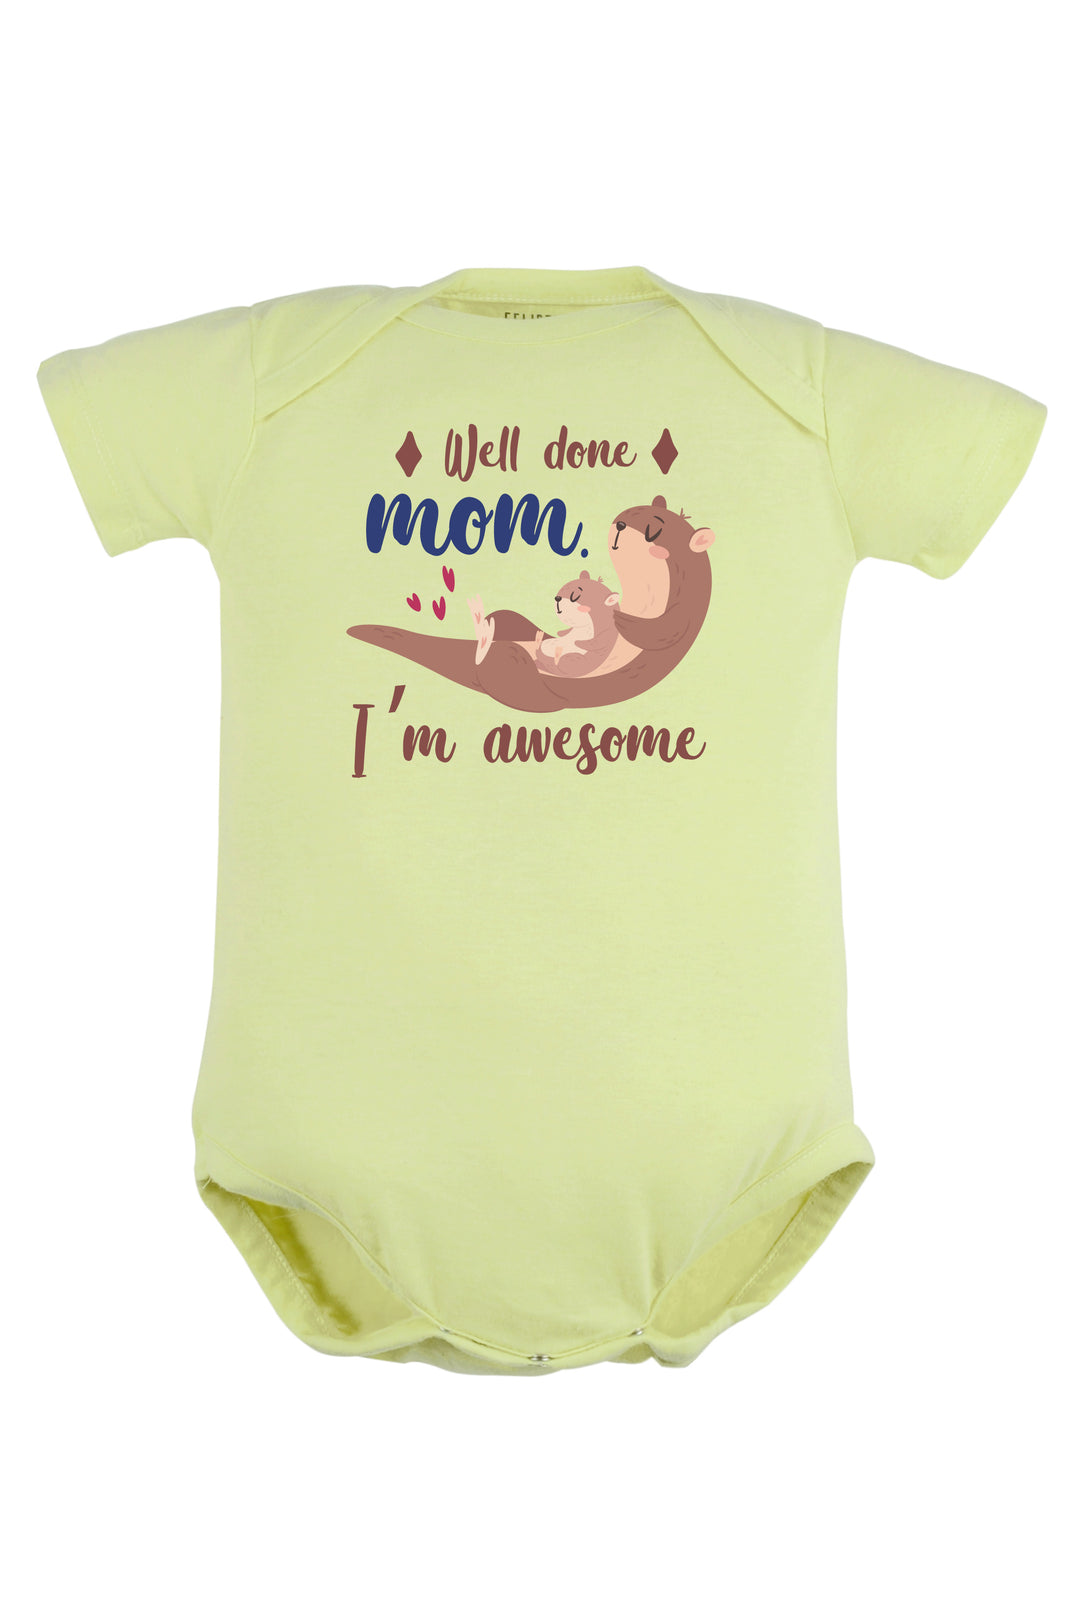 Well Done Mom I'm Awesome Baby Romper | Onesies